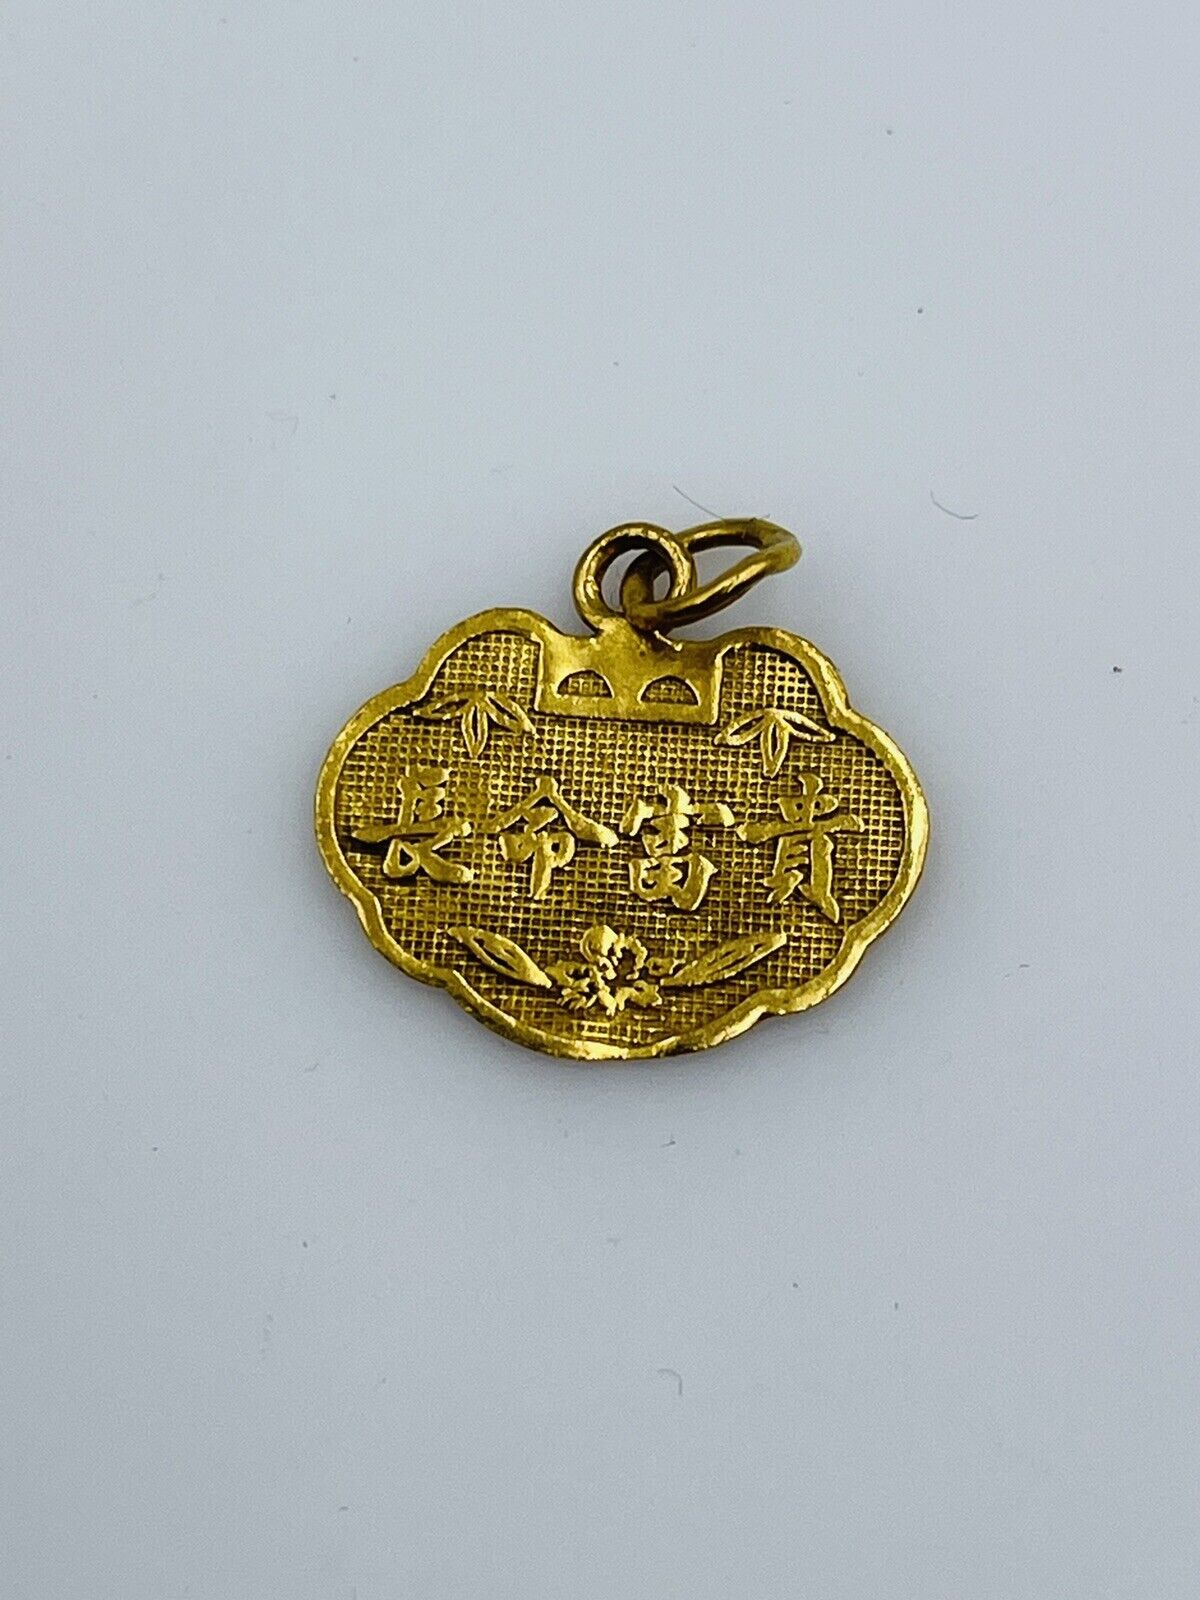 Chinese Vintage 24k Yellow Gold Unusual Shaped Floral Design Small Charm Pendant